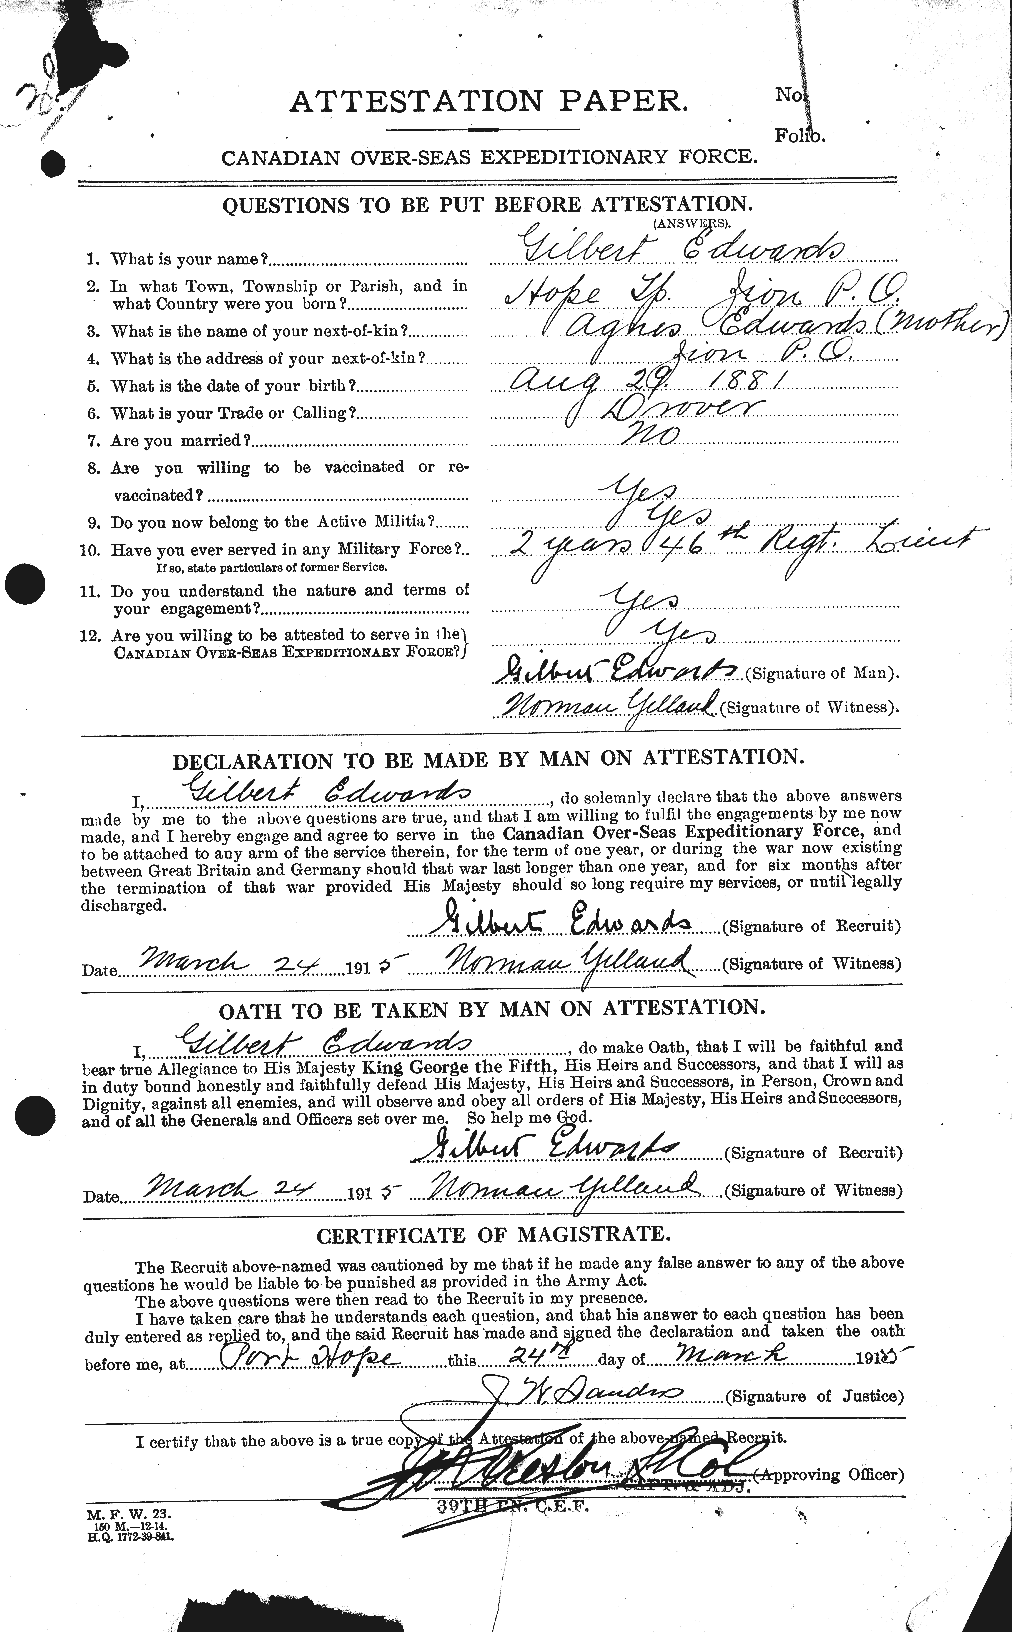 Personnel Records of the First World War - CEF 309701a